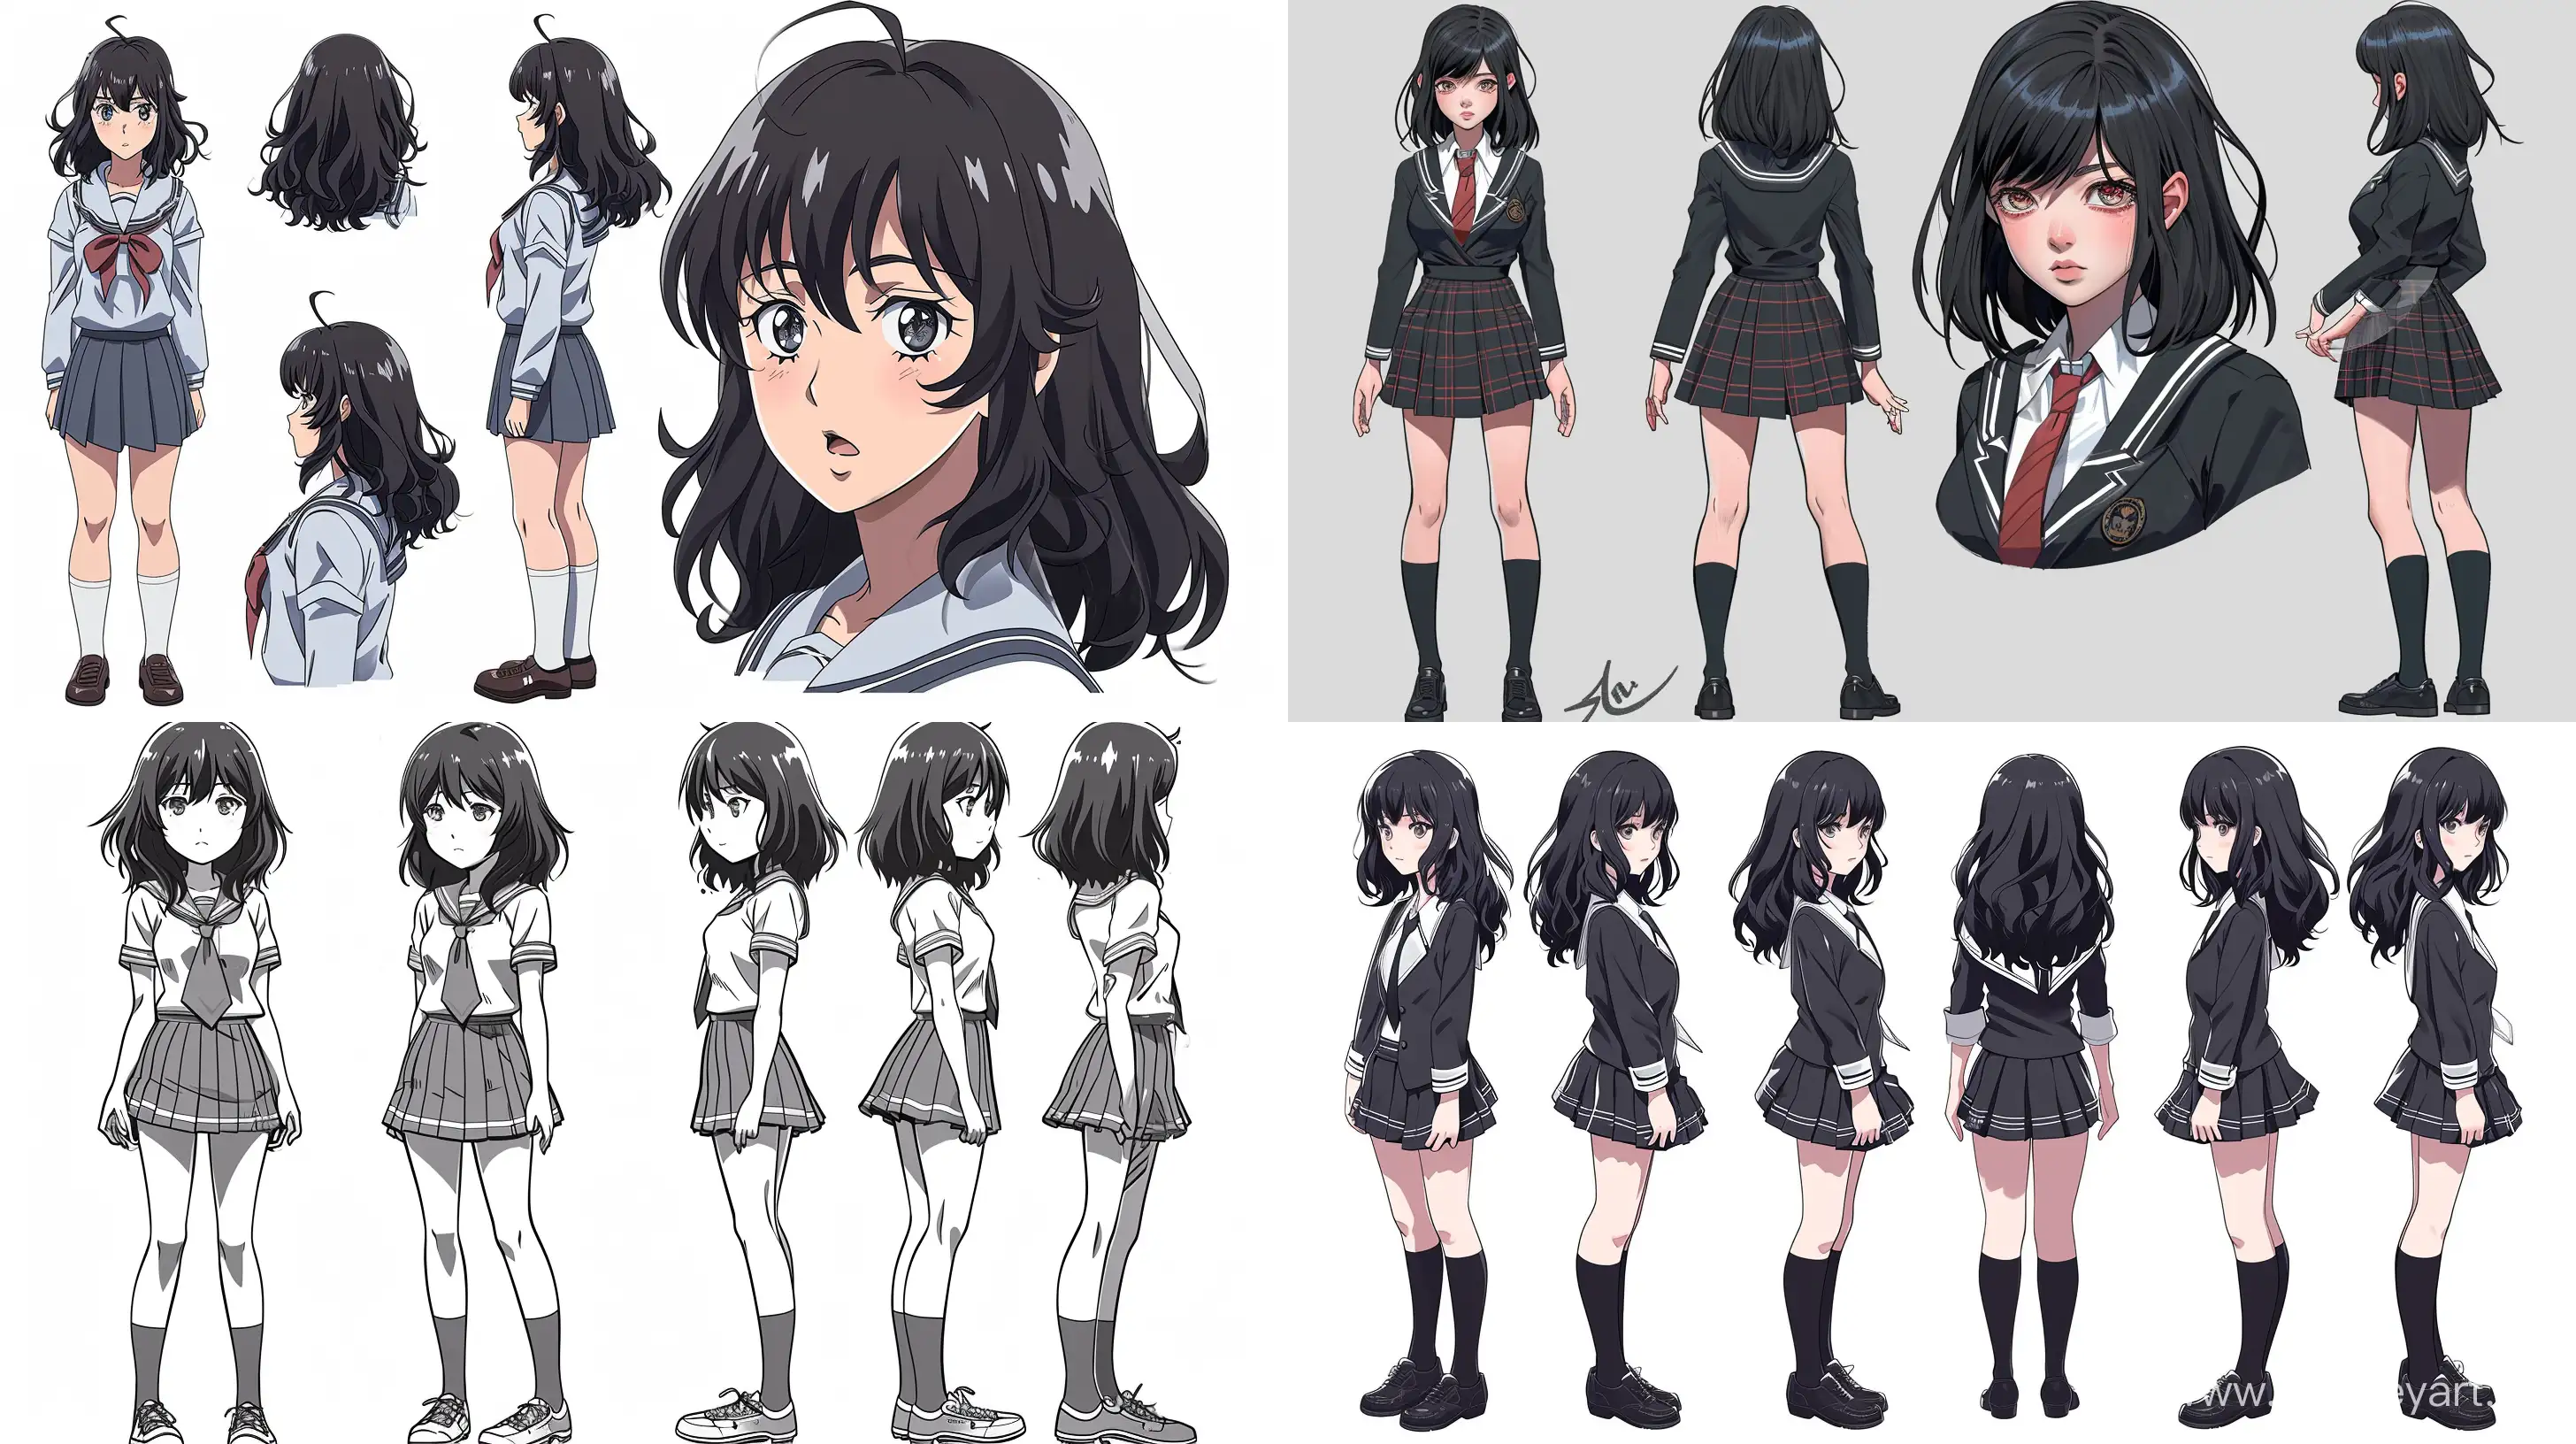 Stylish-Highschool-Girl-with-ShoulderLength-Hair-in-Anime-Character-Sheet